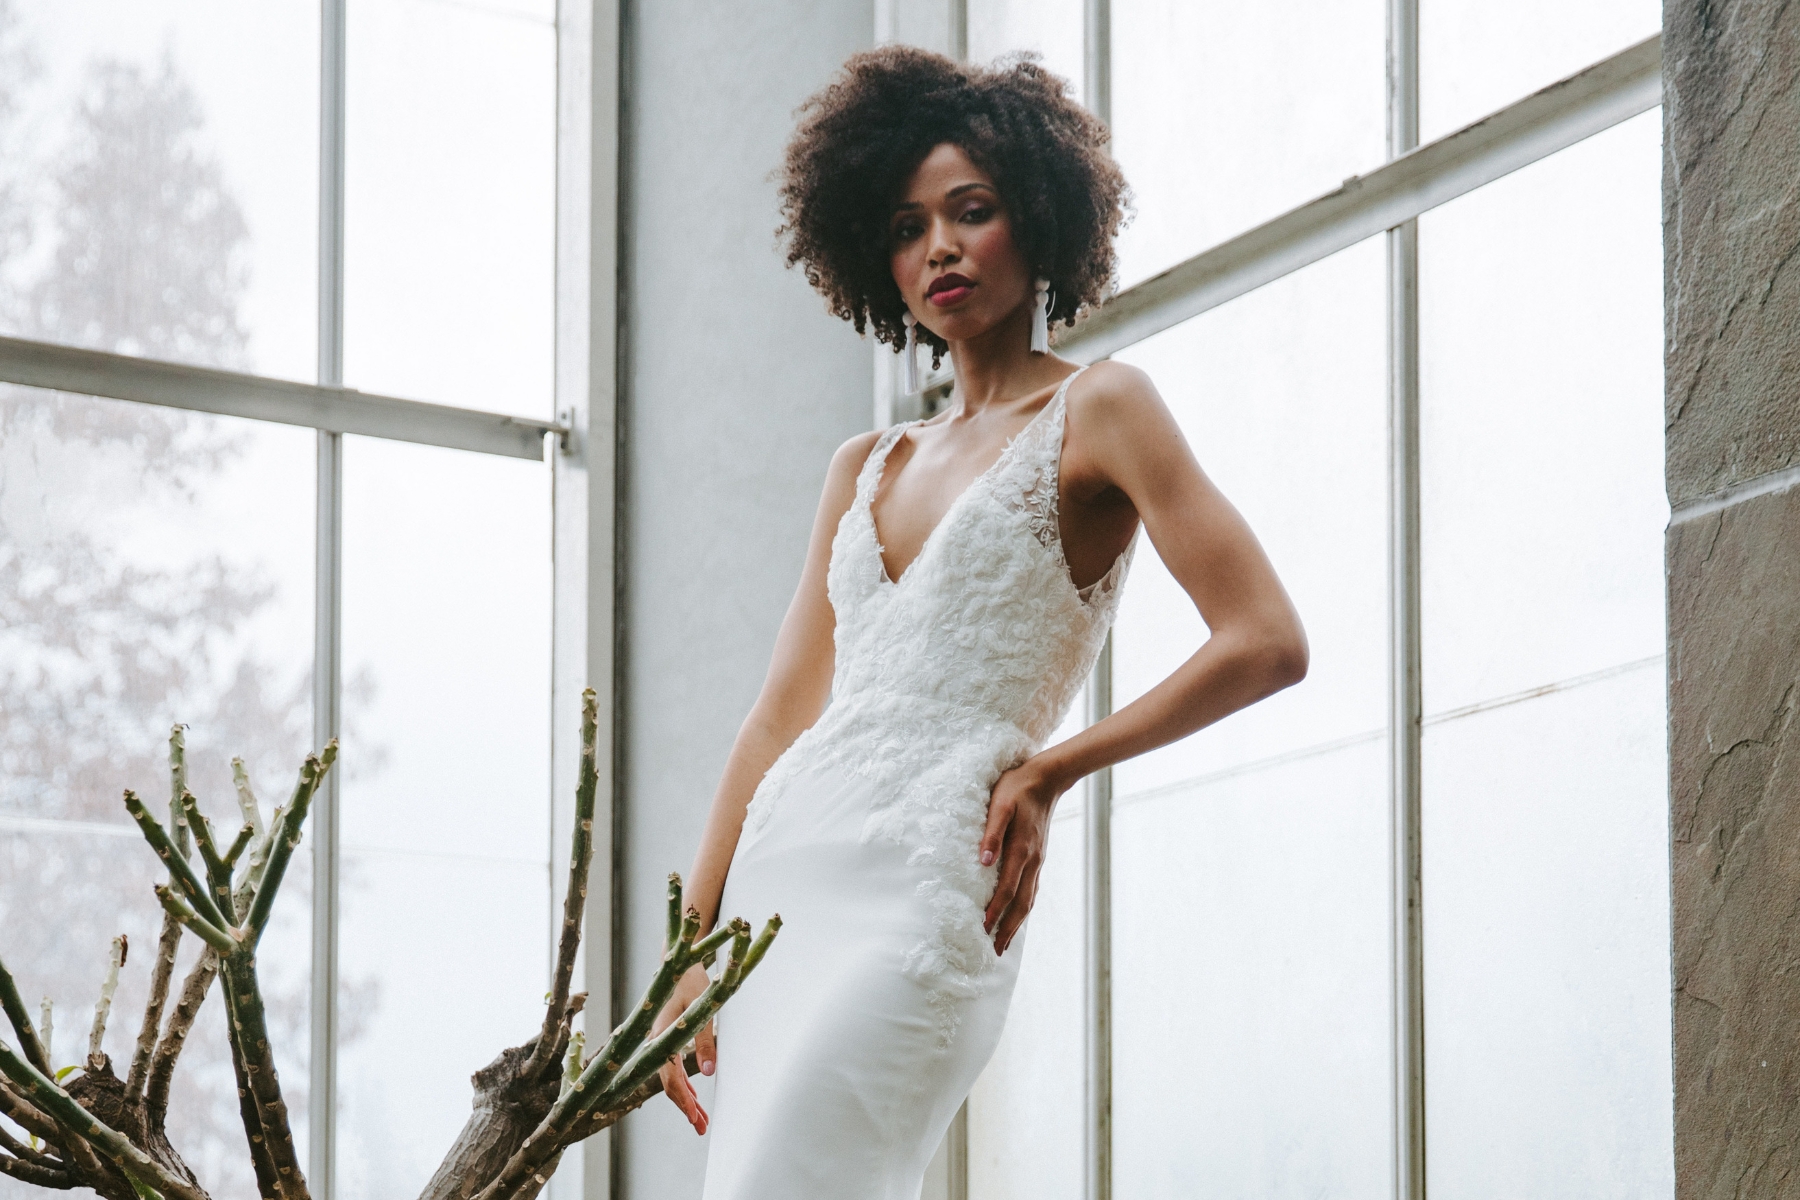 Black bride with afro in a white dress